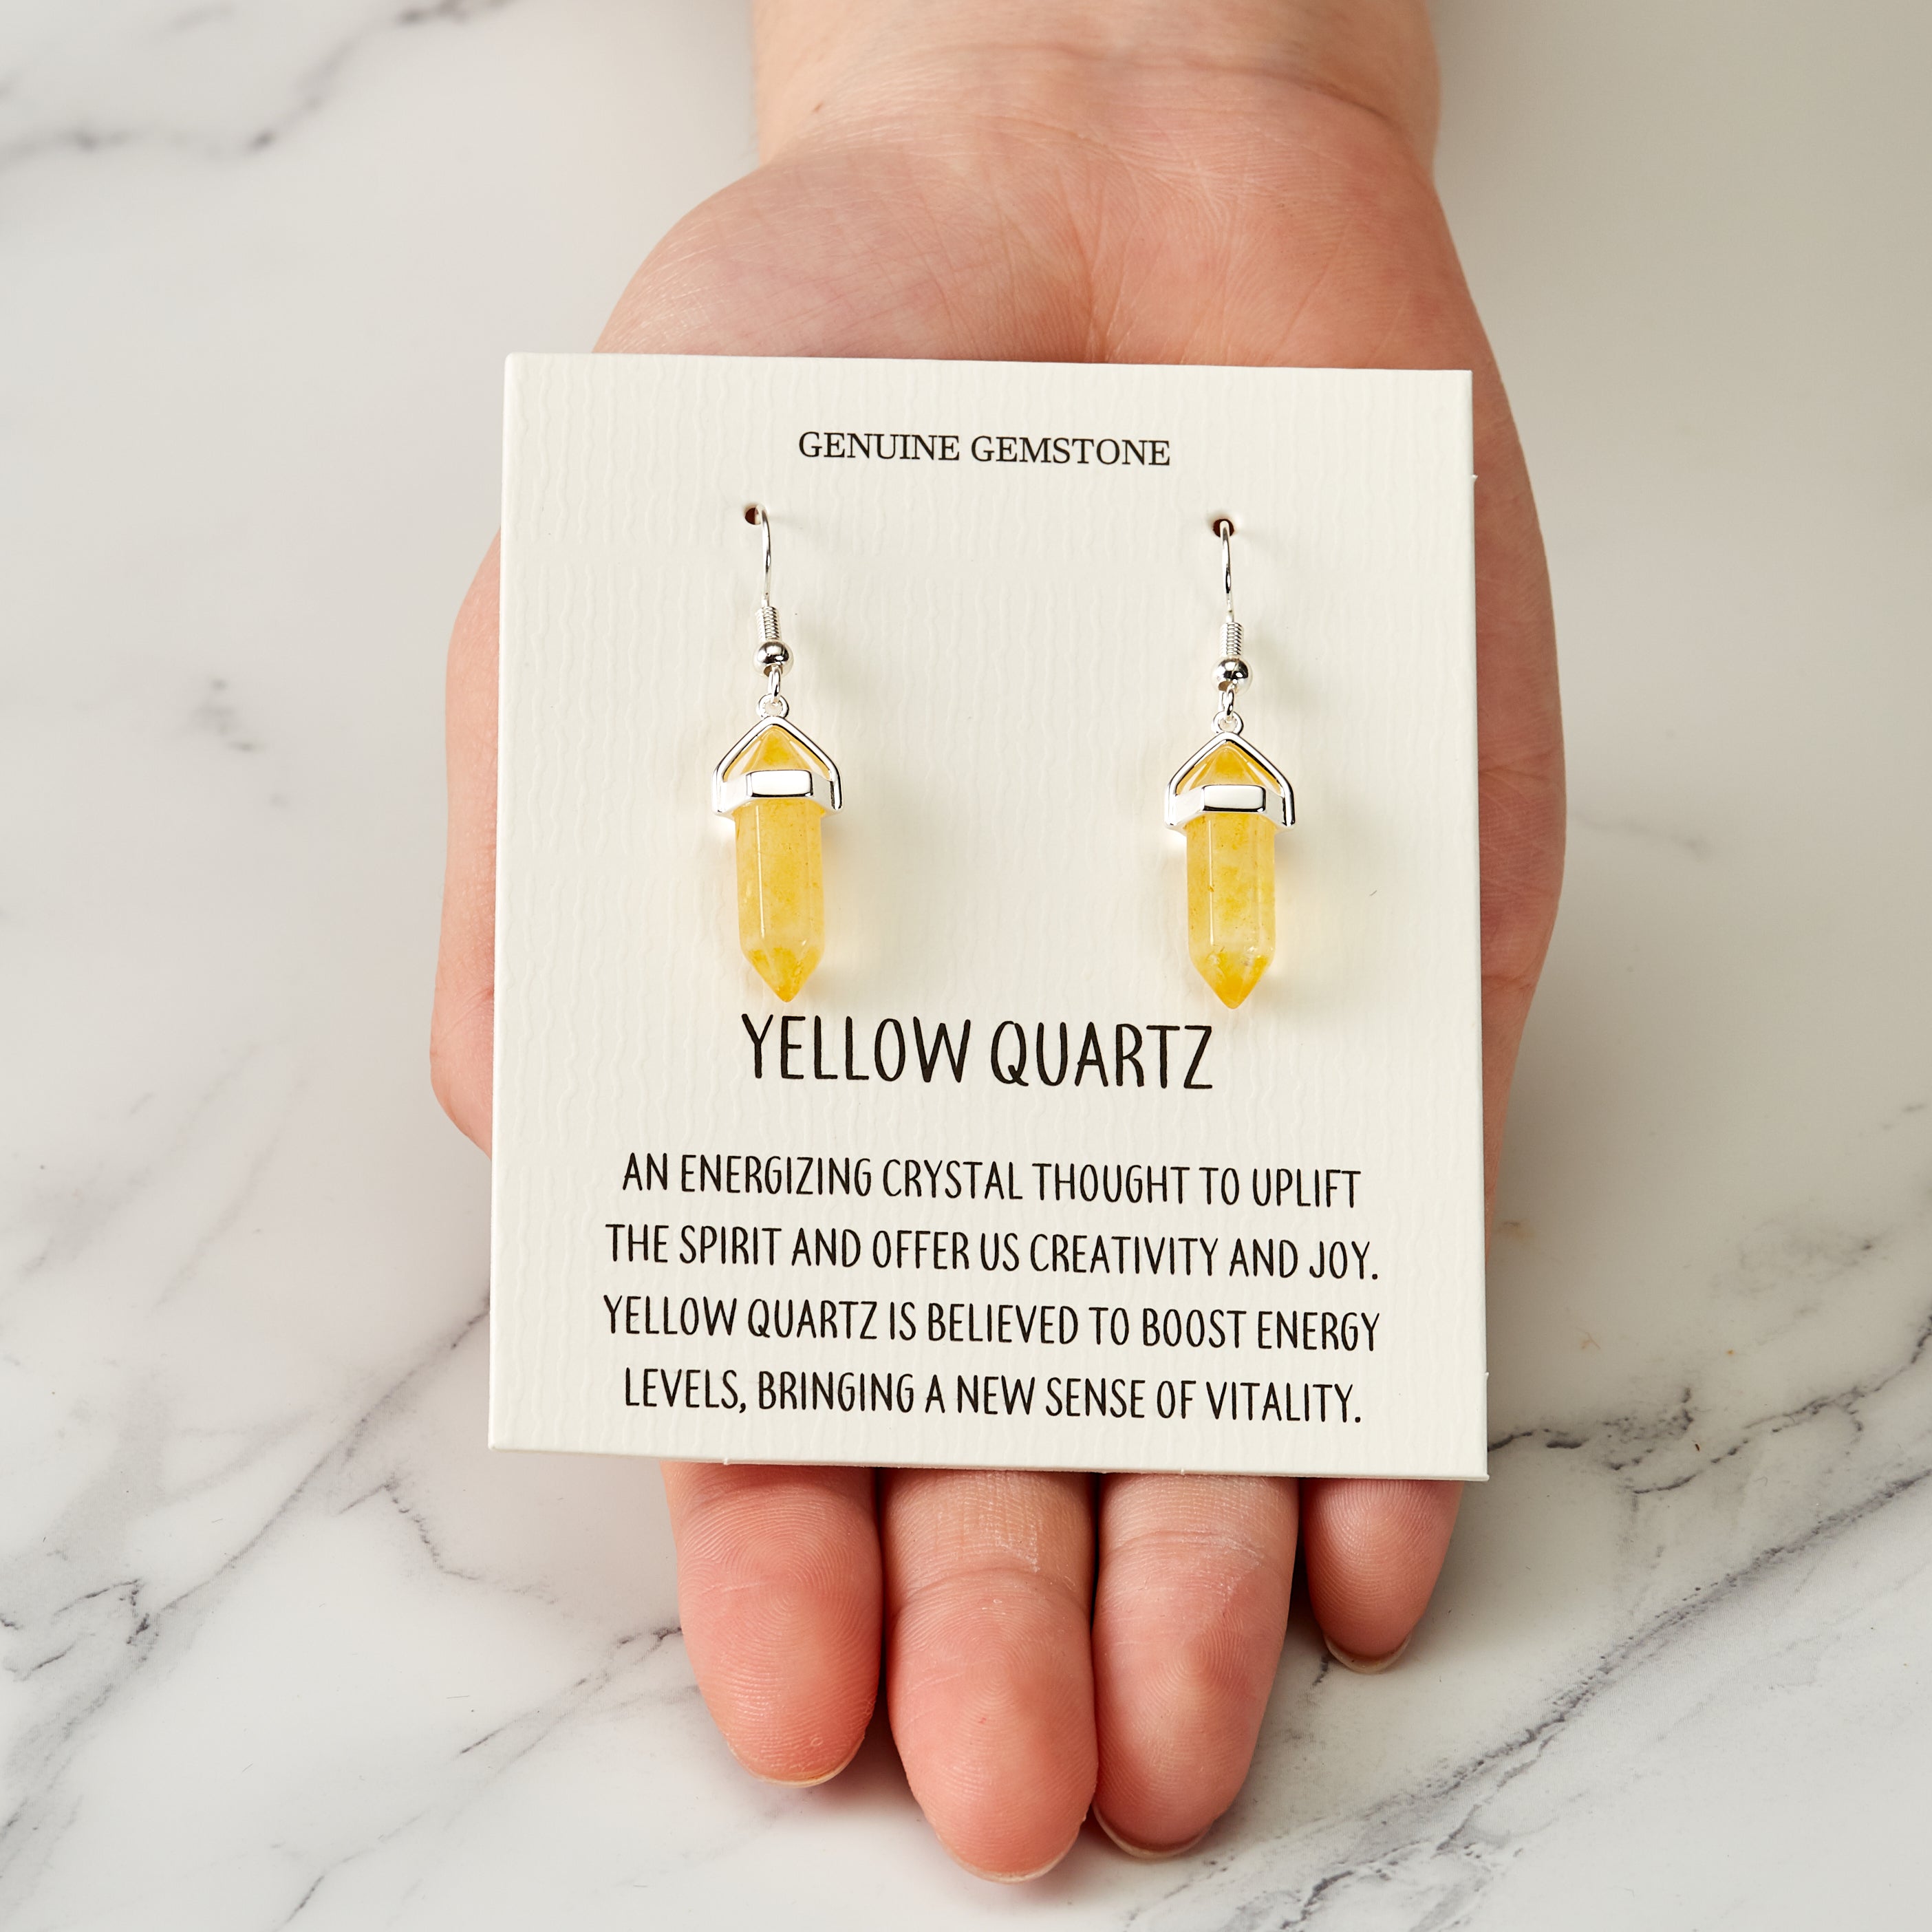 Yellow Quartz Gemstone Drop Earrings with Quote Card